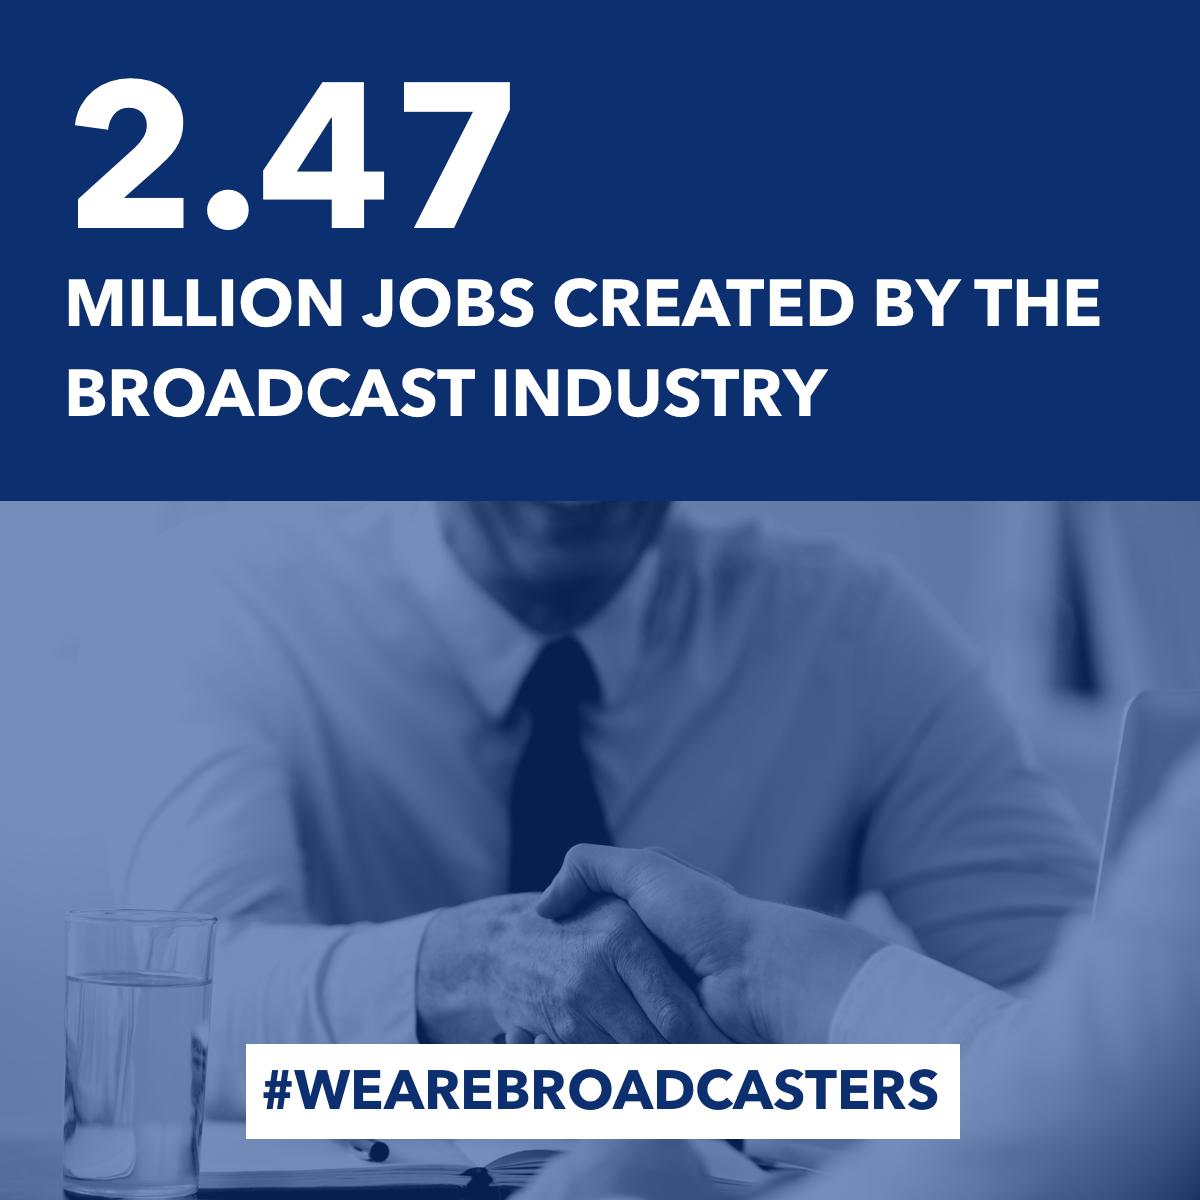 2.42 million jobs created by the broadcast industry